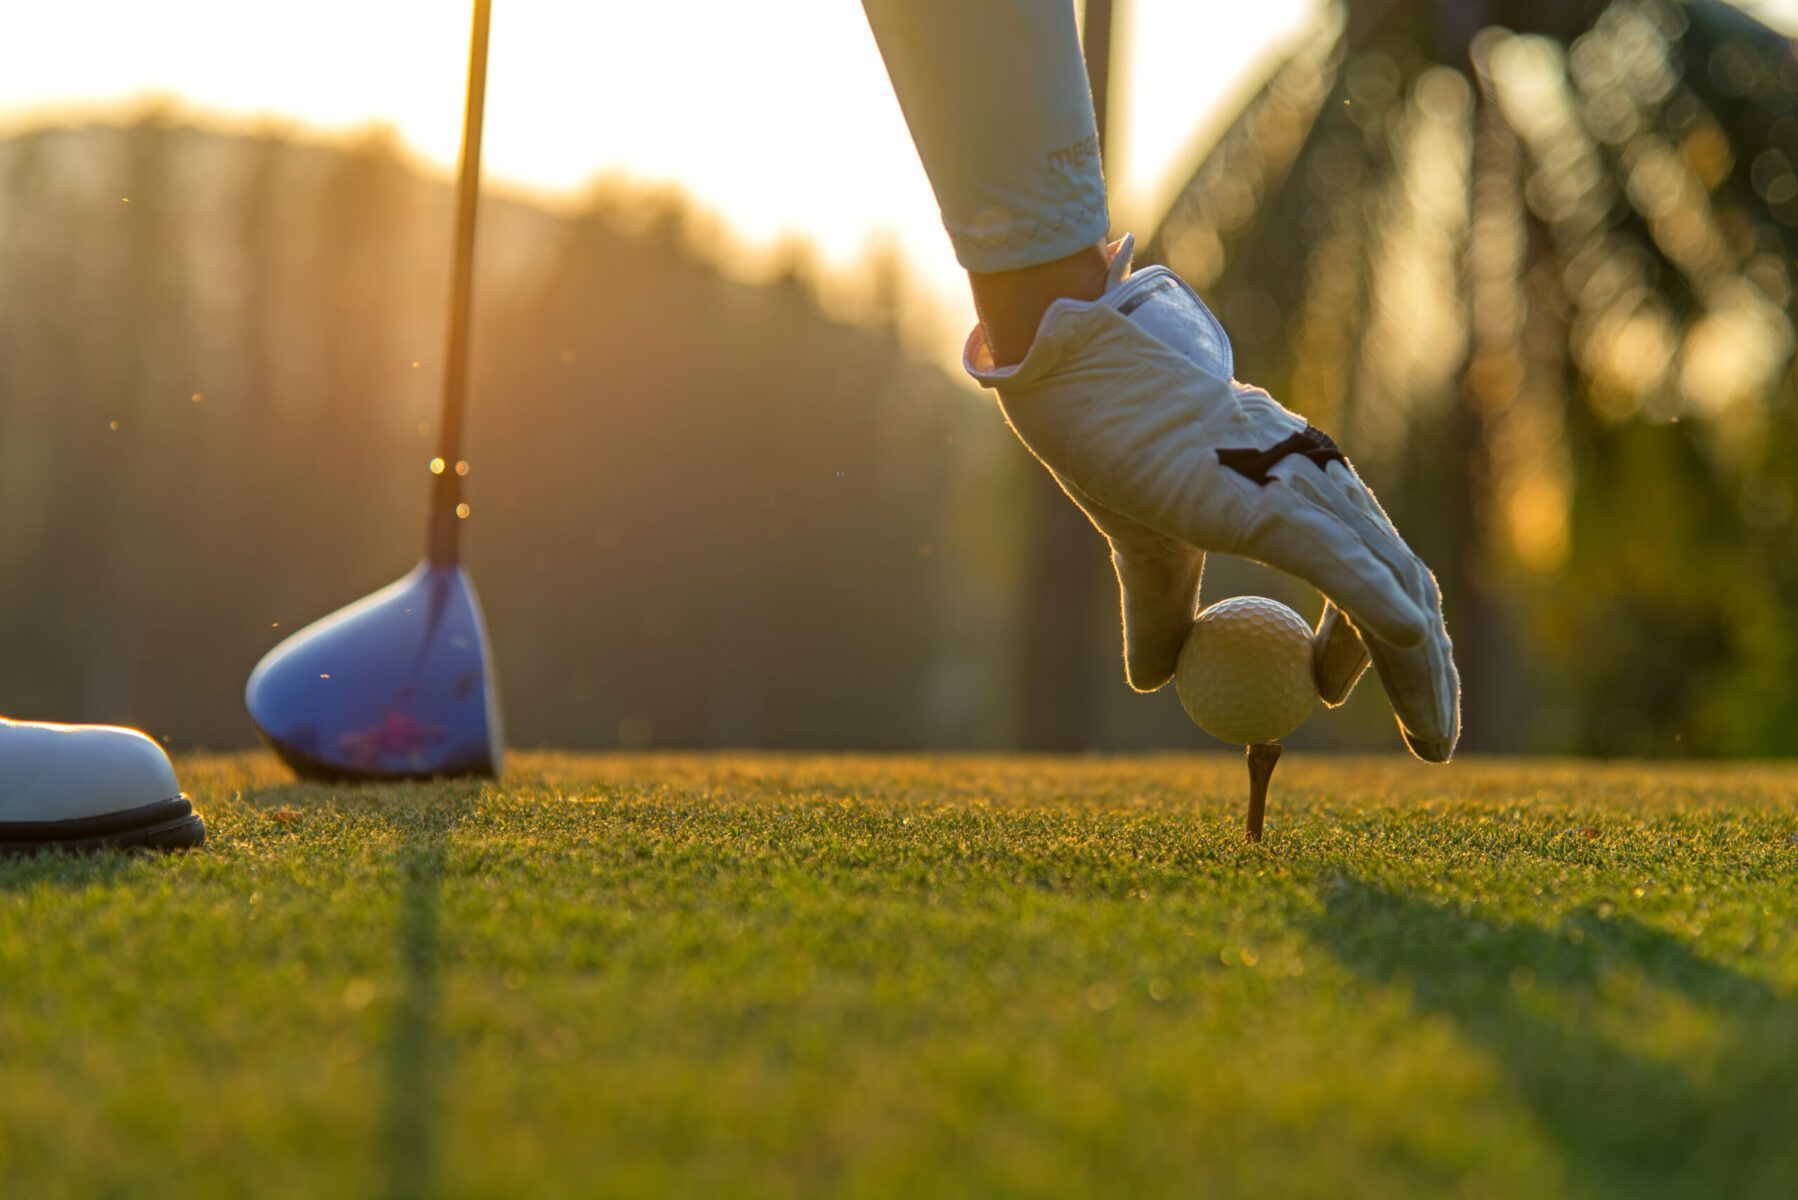 Swing into Summer: Orange County, N.Y., is the Place for Golf Whether you’re a world-class golfer or a first-timer on the greens, Orange County, N.Y., has the ideal golf course for you. Many of them, in fact.